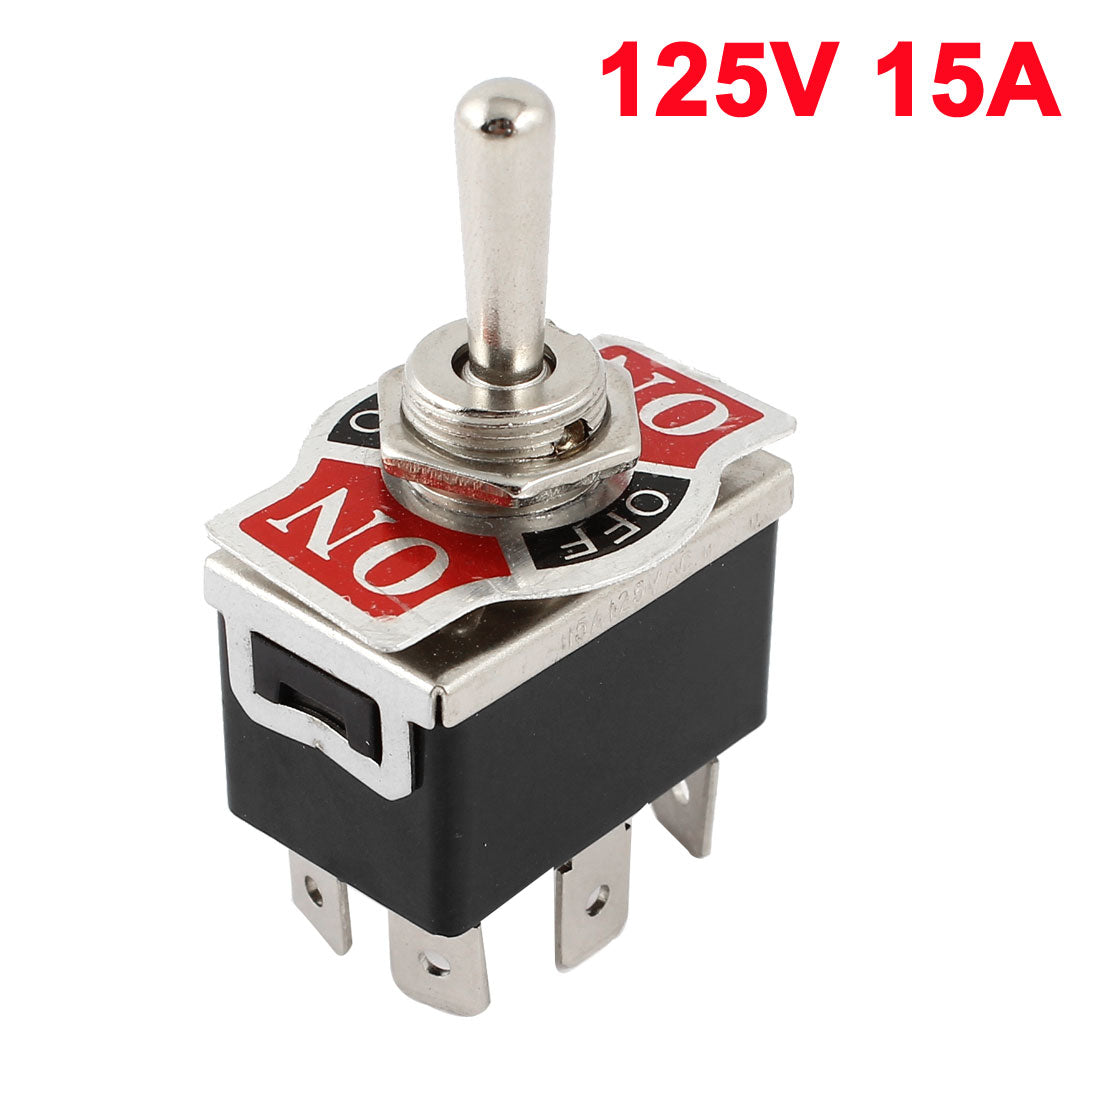 uxcell Uxcell Vehicle Black 6 Pin 3 Position Momentary On/Always Off/Momentary On DPDT Toggle Switch 125V 15A